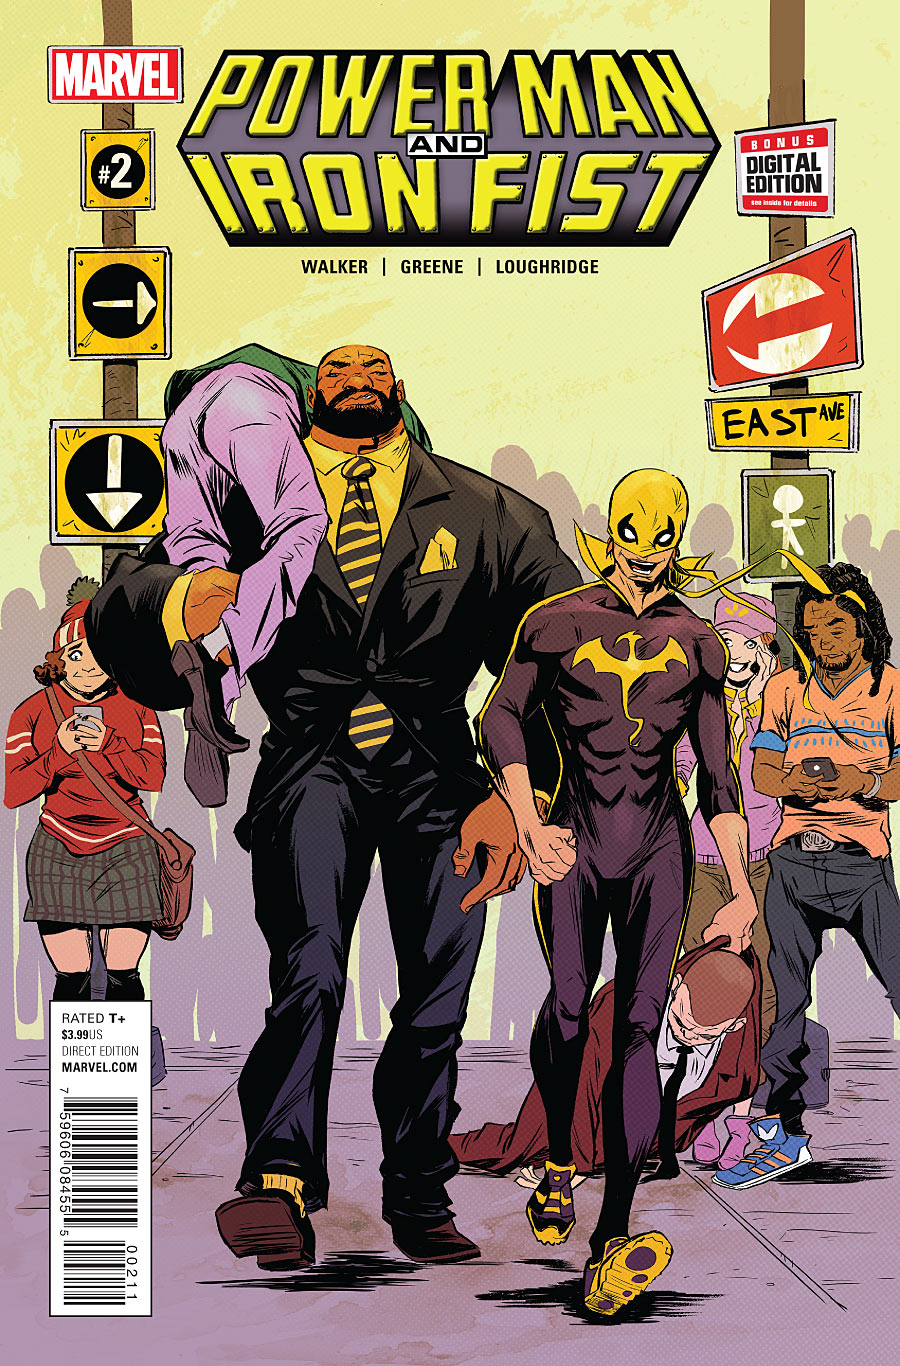 POWER MAN AND IRON FIST #2